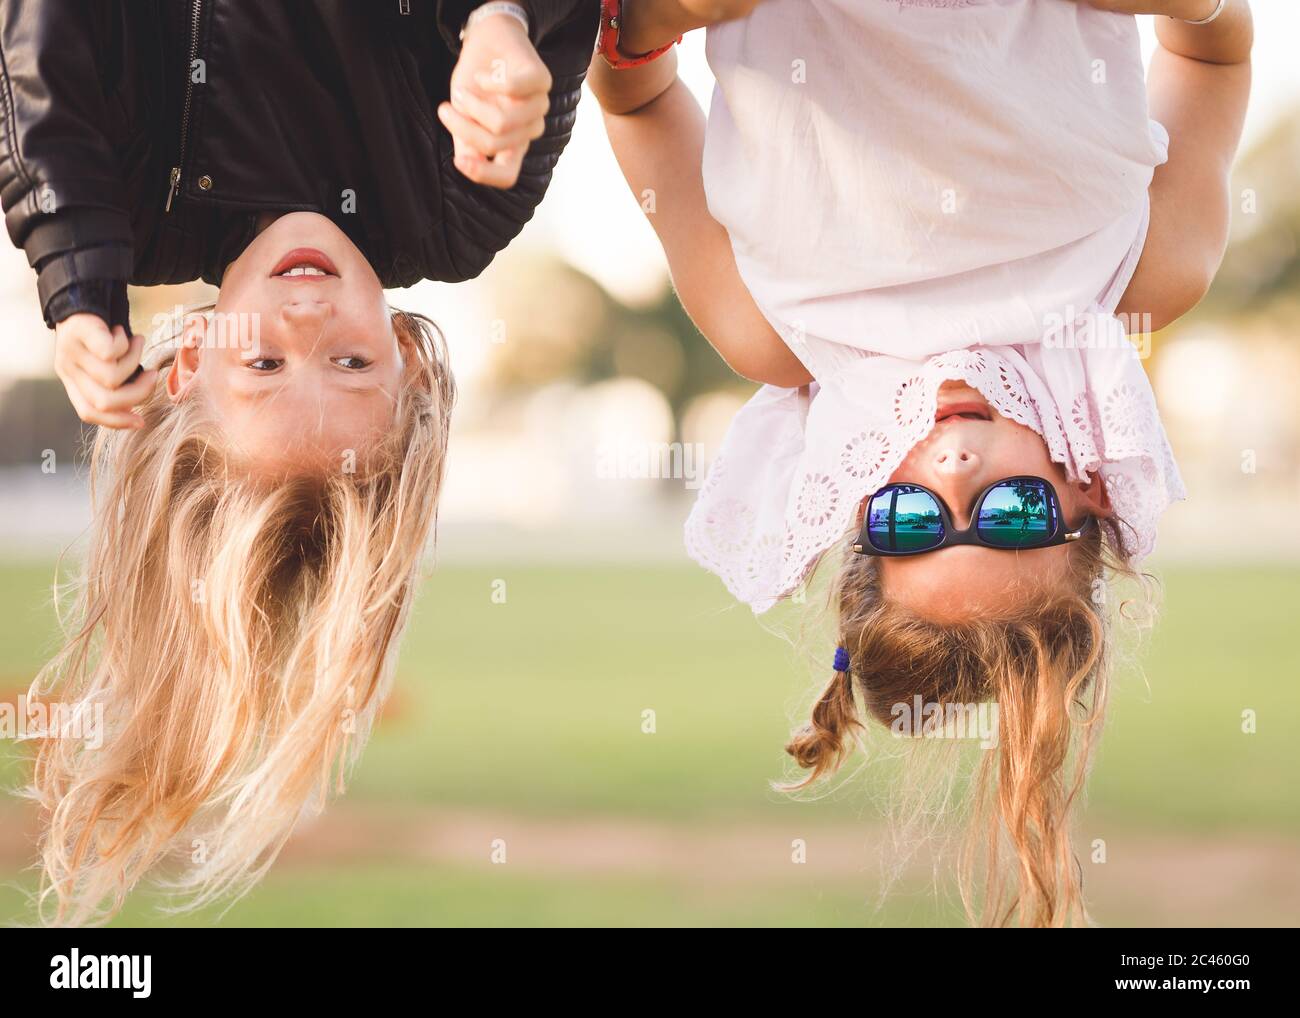 Two young girls, age 8-12, hanging upside down on outdoor fitness device Stock Photo